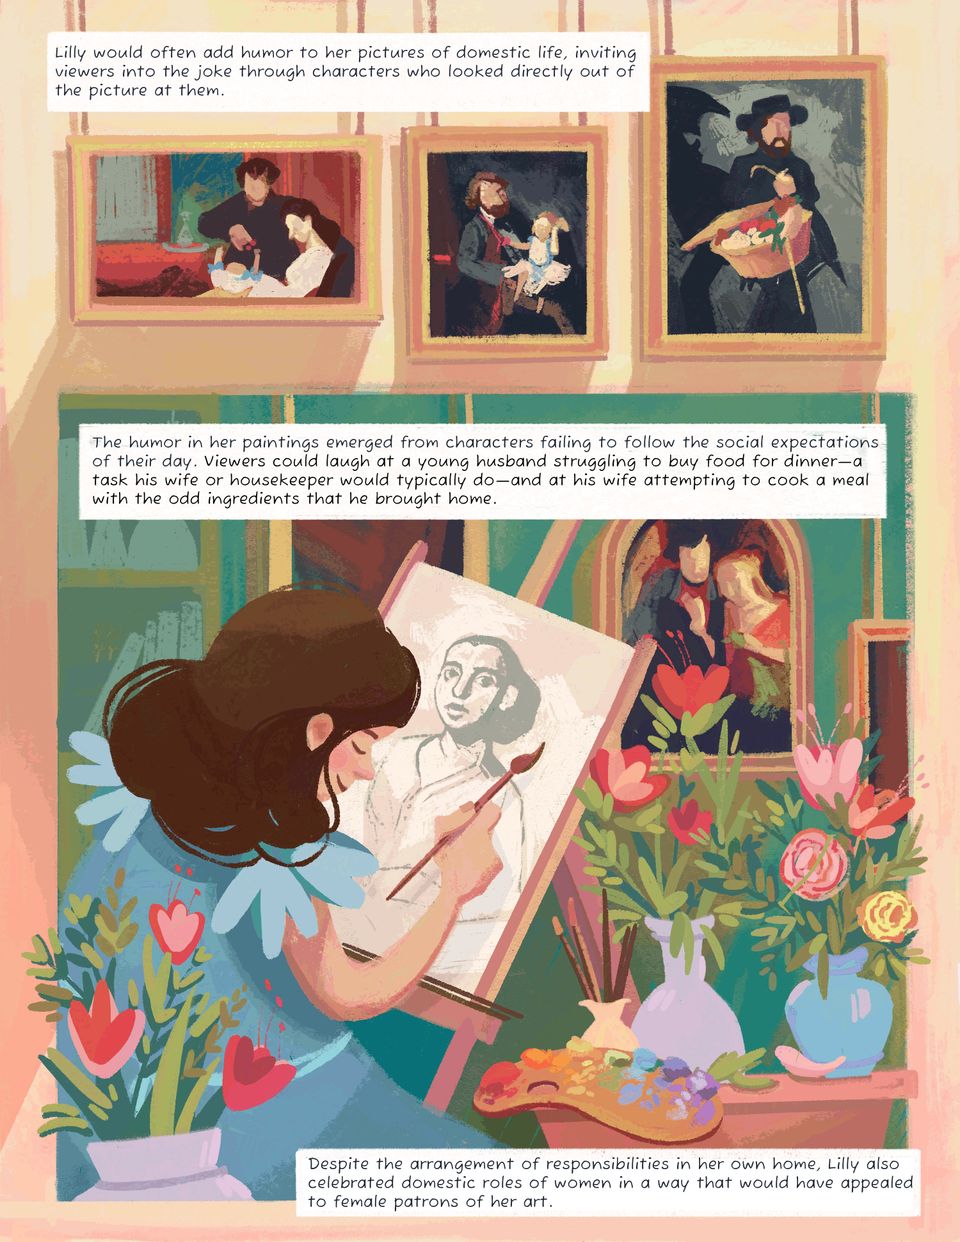 An illustrated rendering of Lilly's domestic paintings above an illustration of Lilly painting at an easel surrounded by flowers, with written description.